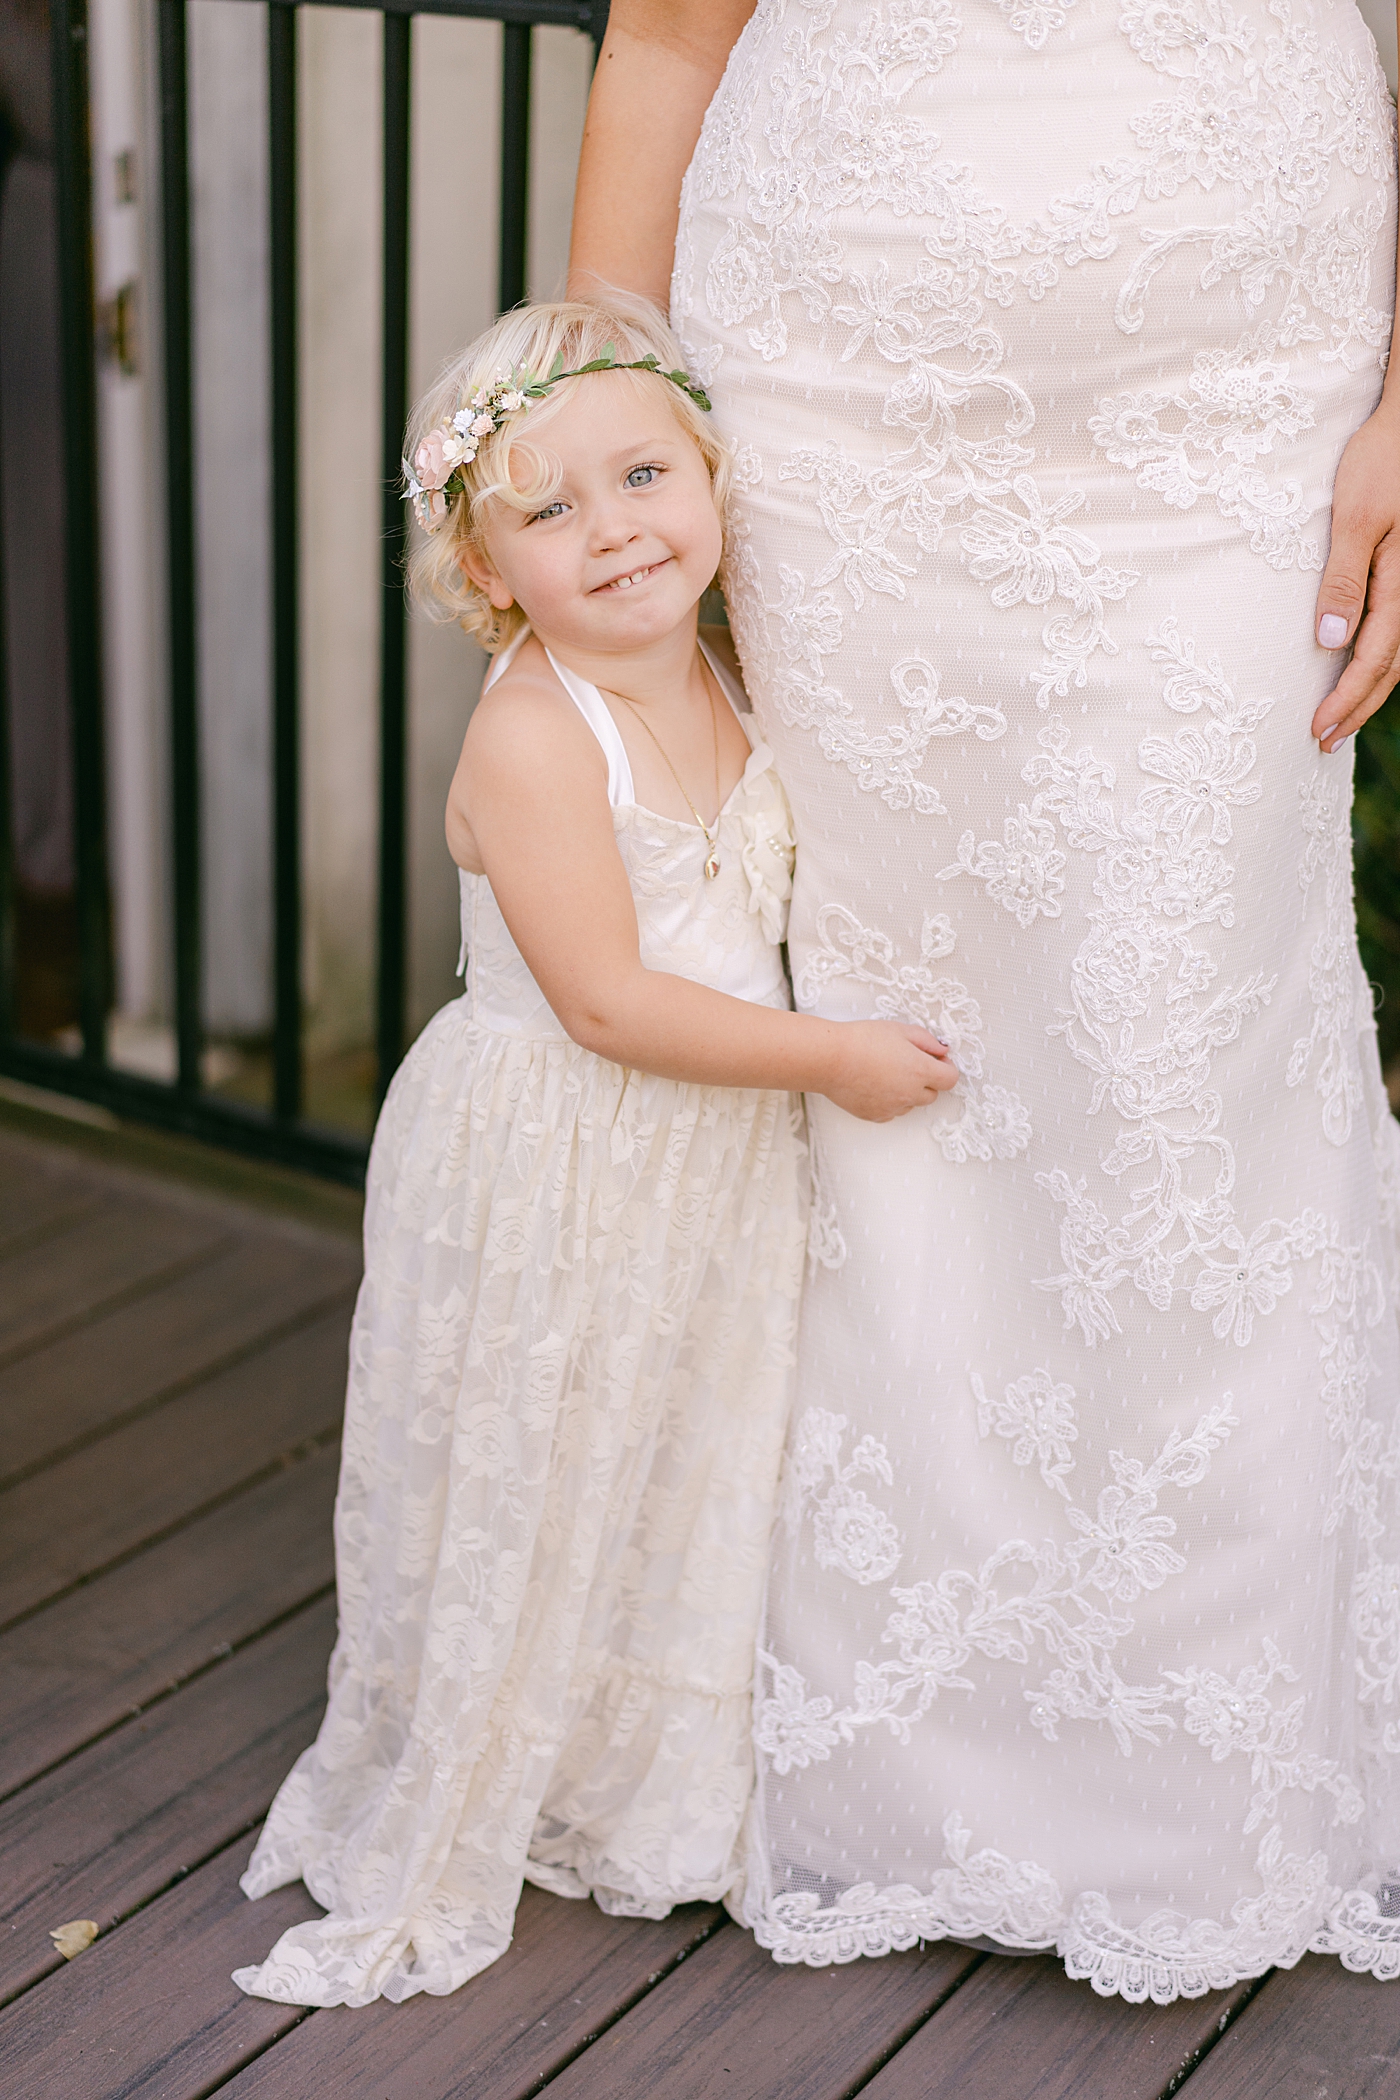 Flower girl smiling with bride | Photo by Hope Helmuth Photography